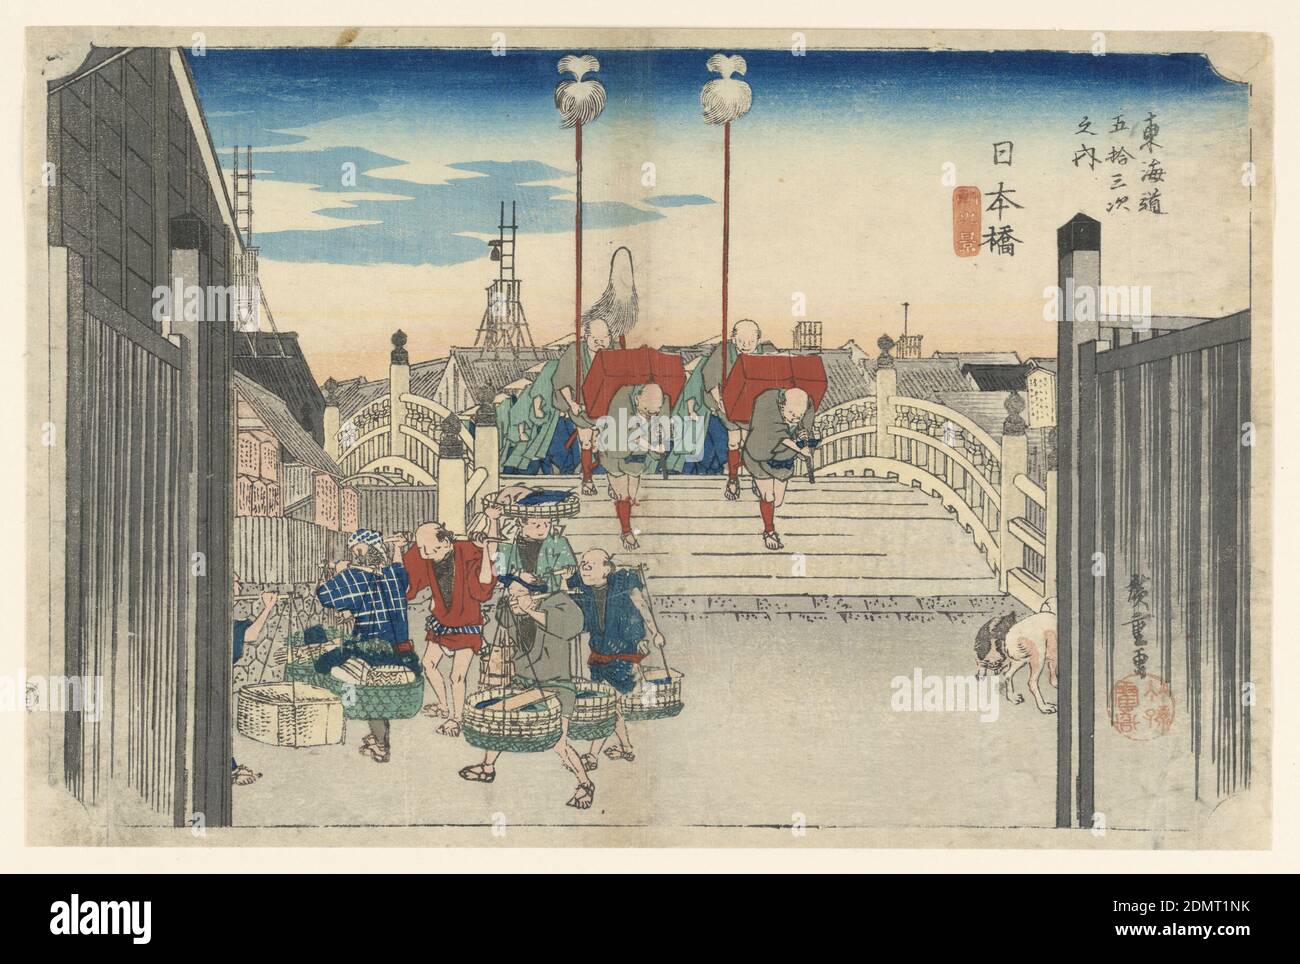 Nihon Bridge, Morning View, Nihonbashi, in The Fifty-Three Stations of the Tokaido Road (Tokaido Gojusan Tsugi-no Uchi), Ando Hiroshige, Japanese, 1797–1858, Woodblock print in colored ink on paper, Hirogshige: plate 1. Morning view (Nihon-bashi, asa-no-kei) subtitle of second state: gyoretsu furude (processional Standard-bearers). This print shows the middle class during the late Edo period. Located on the bridge over the Kamo River, in the early morning, is a seen of daimyo's procession crossing bridge, two porters carrying red boxes followed by two standard-bearers. Stock Photo